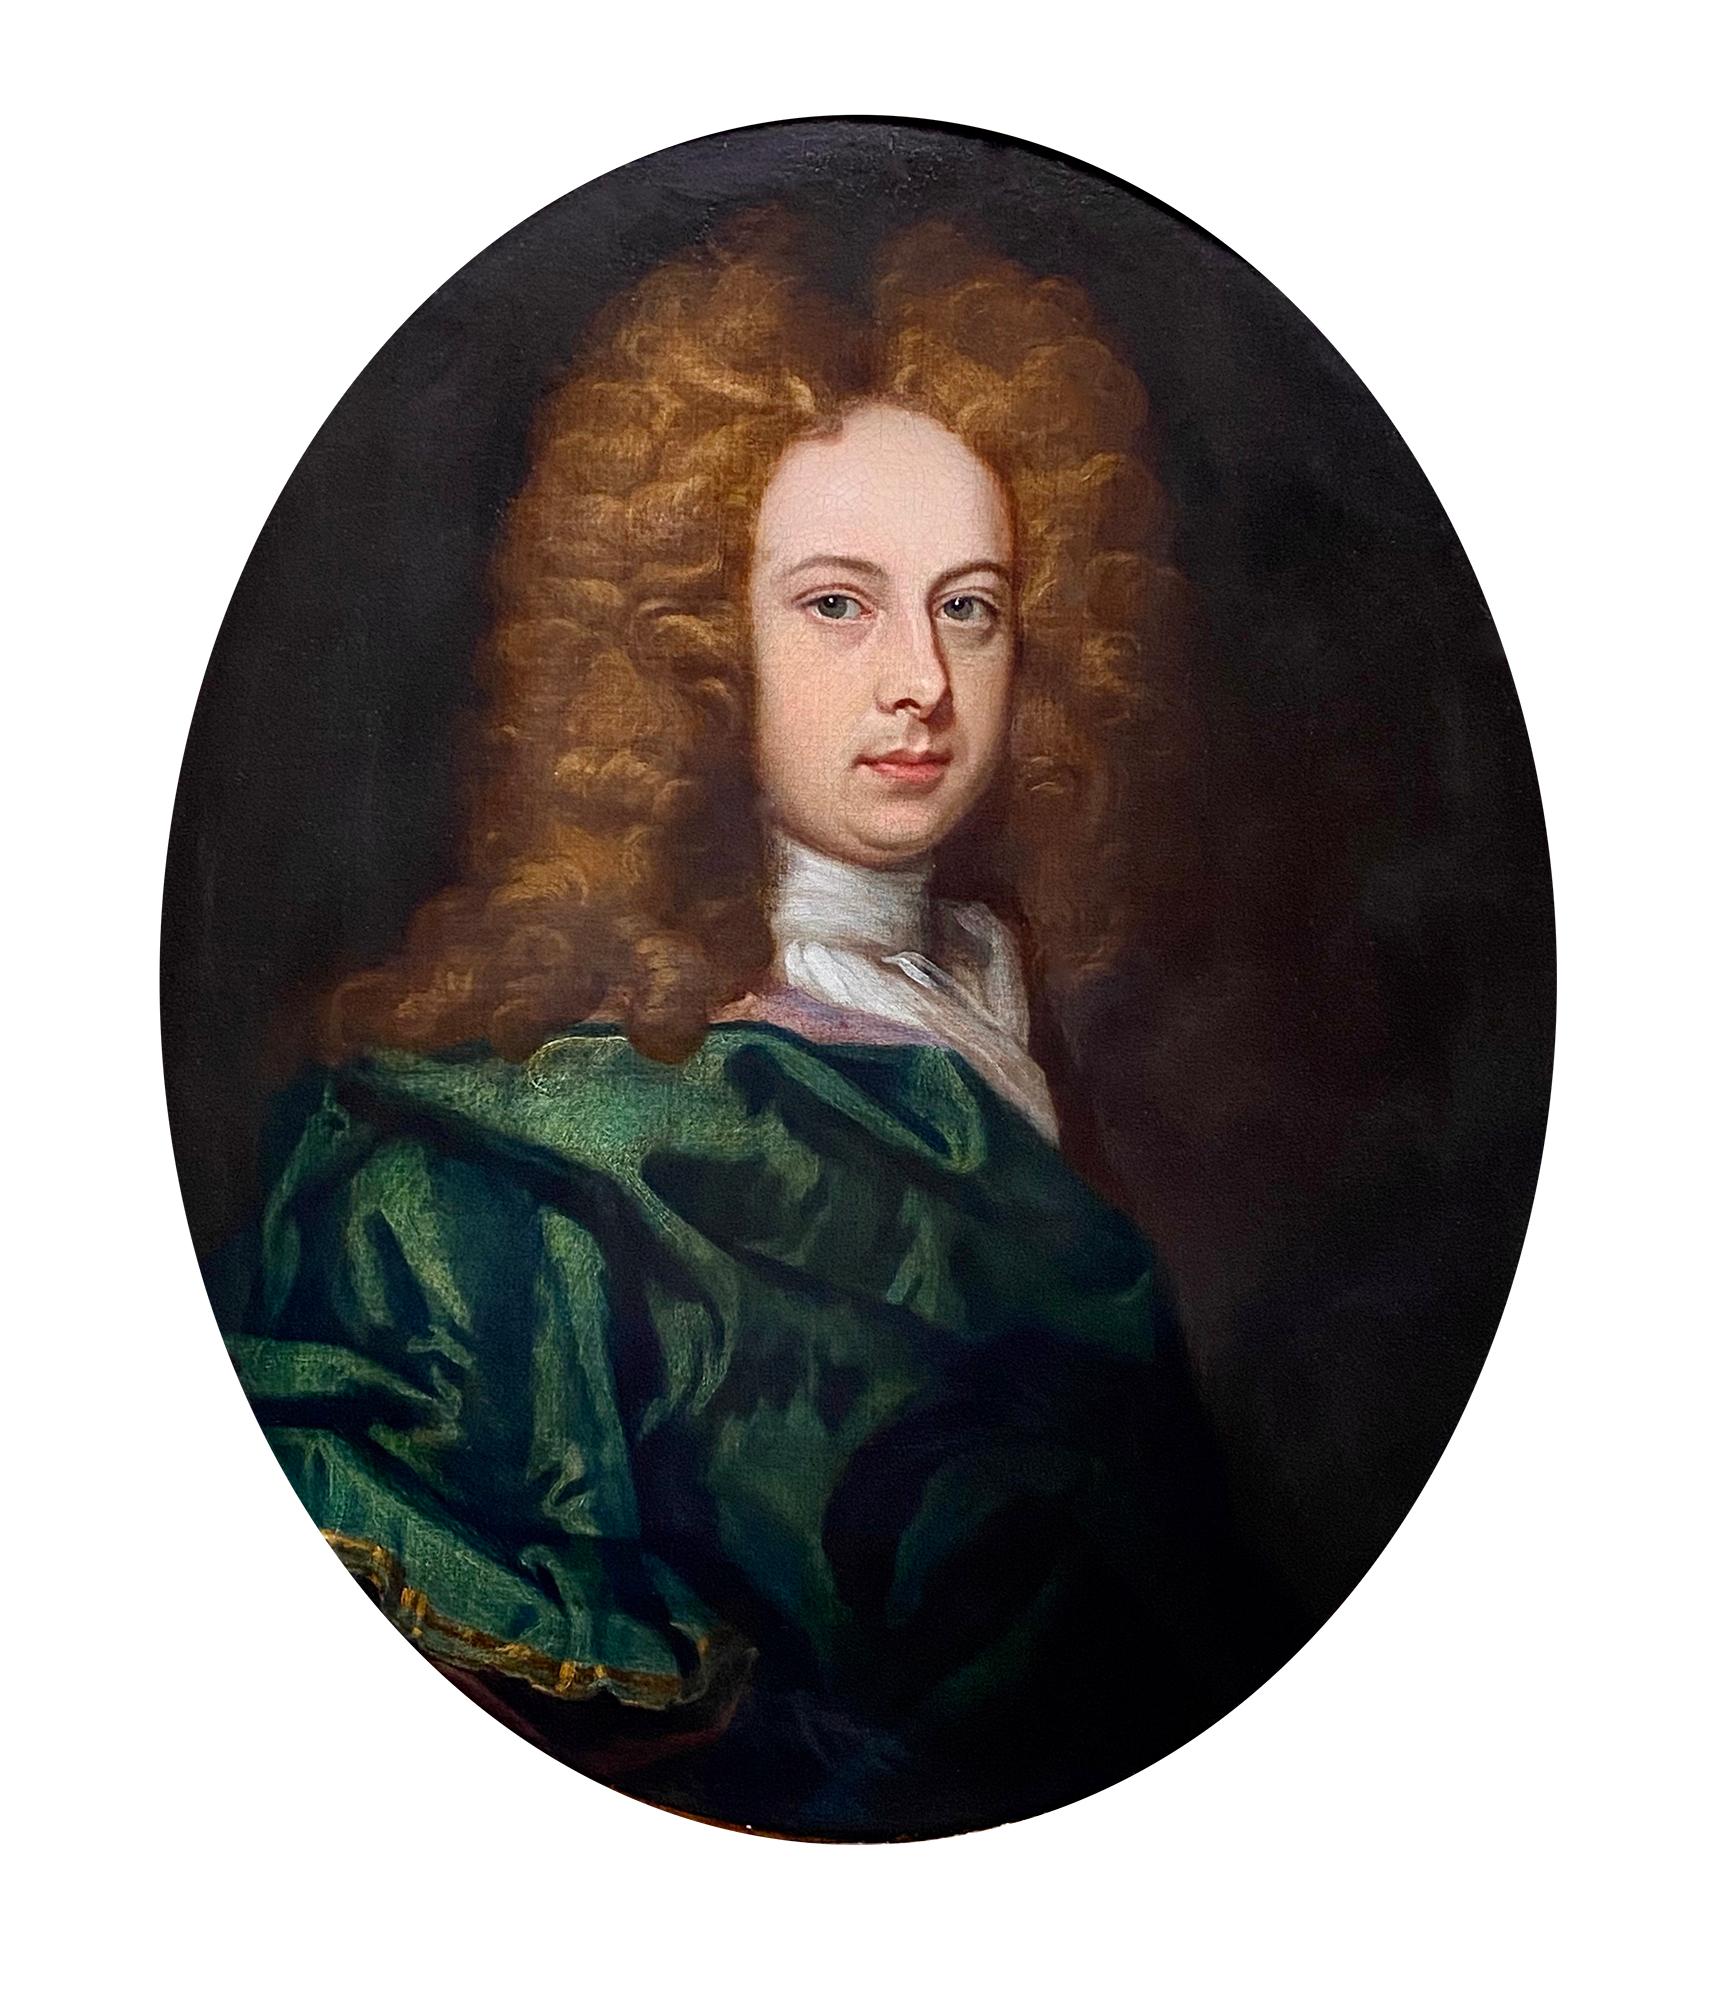 17TH CENTURY ENGLISH OIL PORTRAIT OF A YOUNG GENTLEMAN IN A GREEN SILK CLOAK. - Painting by Johann Kerseboom